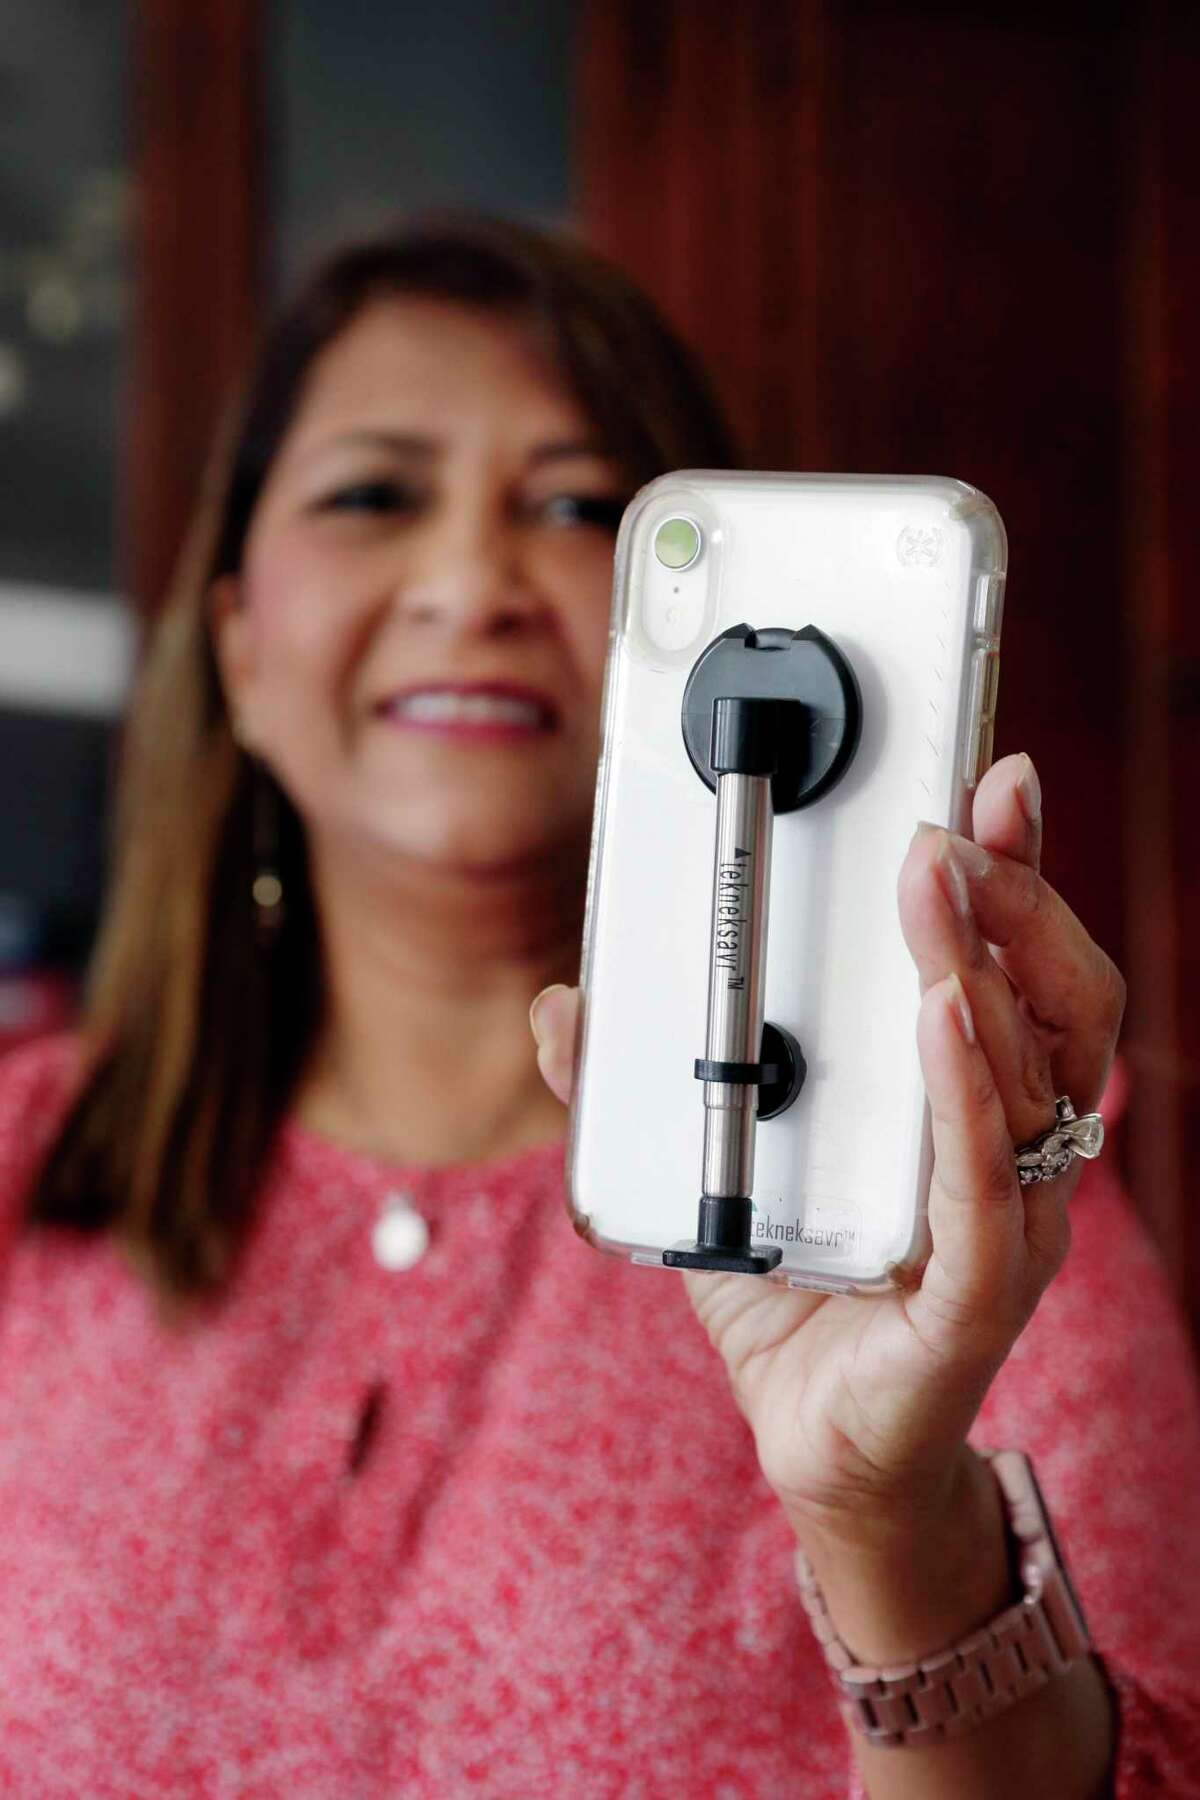 Atiya Syverson, a workplace ergonomics consultant, with her smart phone adapter invention, the “Tekneksavr”, to help relieve “text neck” Tuesday, Jul. 14, 2020 at her home in Katy, TX. The multi-use phone attachment improves posture and neck pain while using a smart phone.